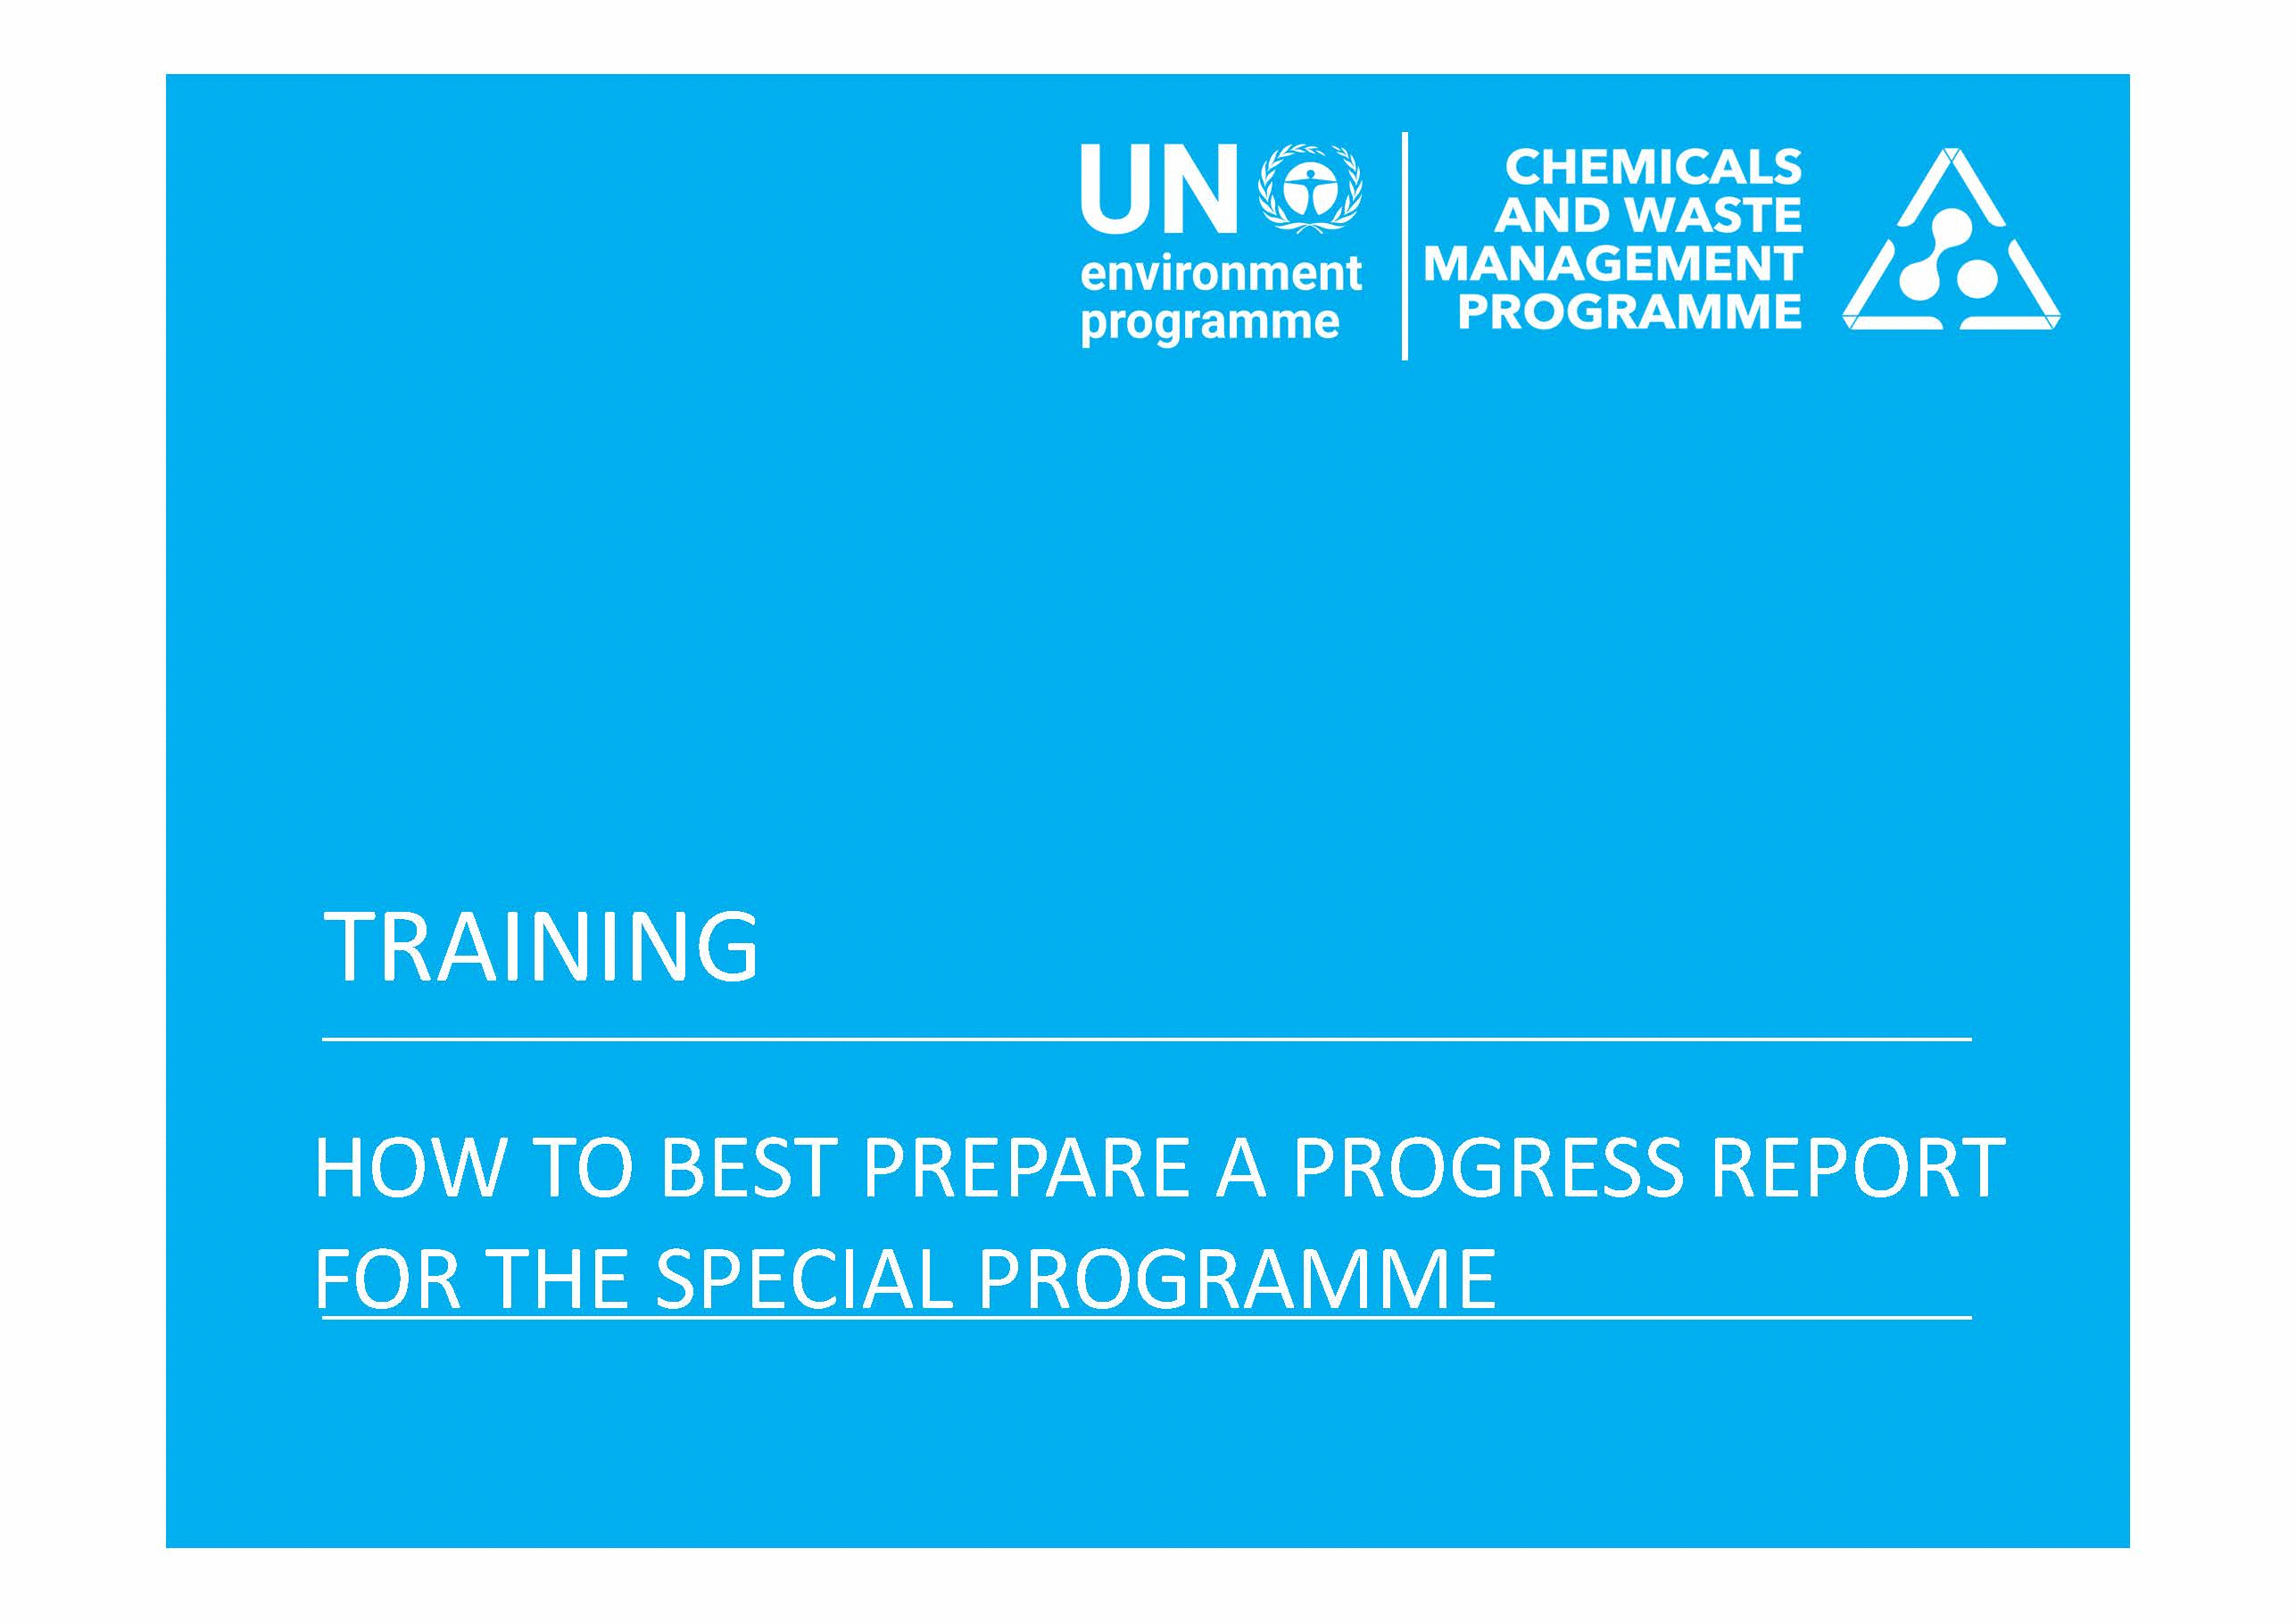 How to best prepare a Progress Report under the Special Programme